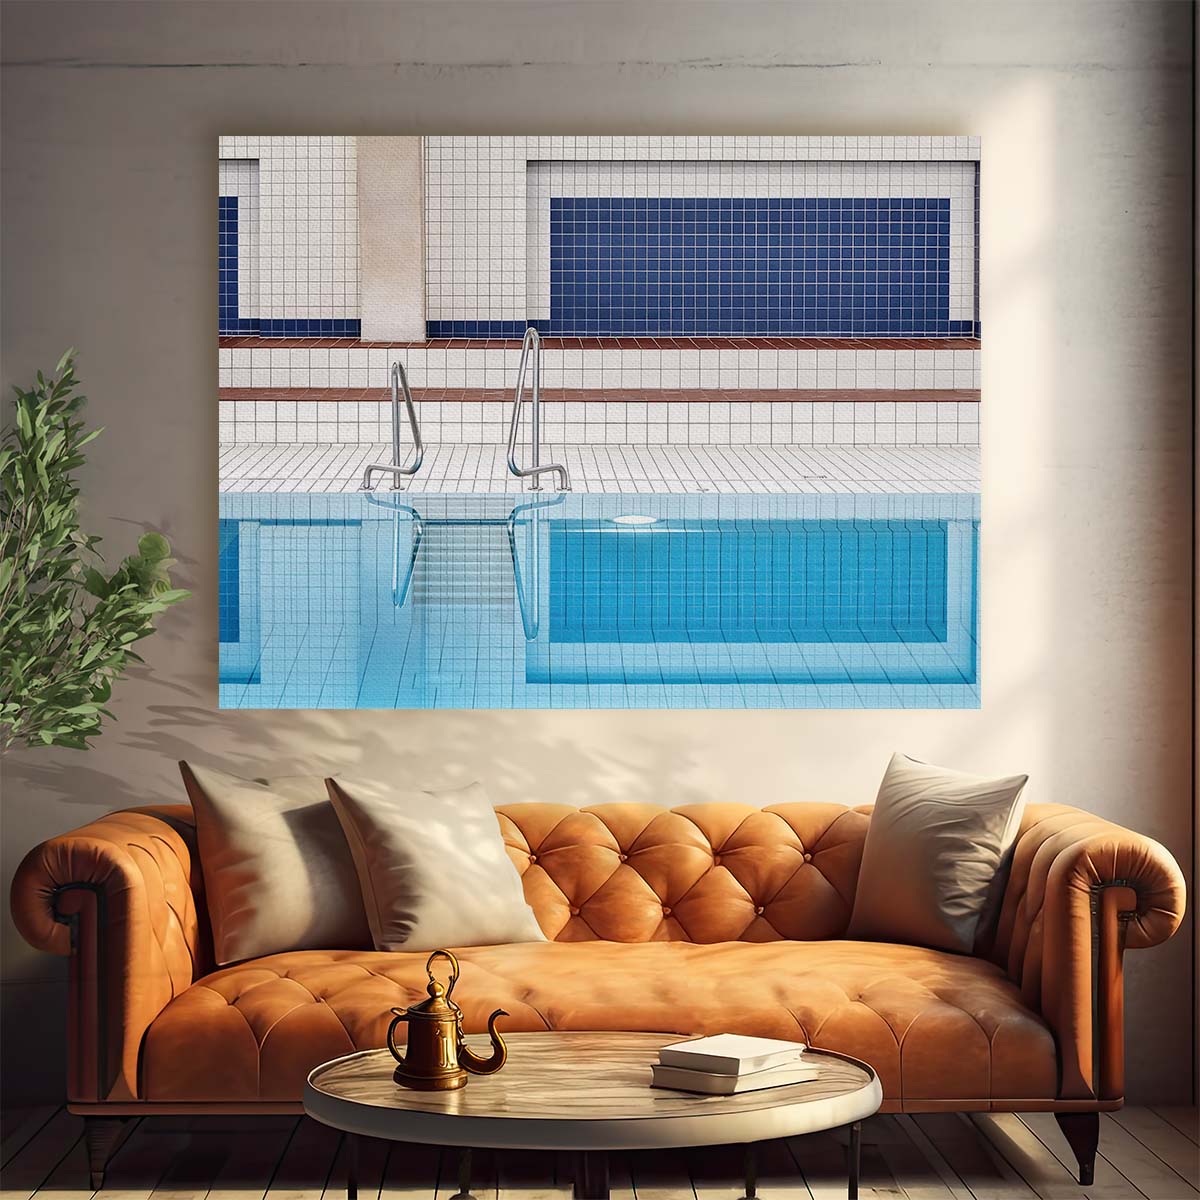 Abstract Indoor Pool Stuttgart Reflection Wall Art by Luxuriance Designs. Made in USA.